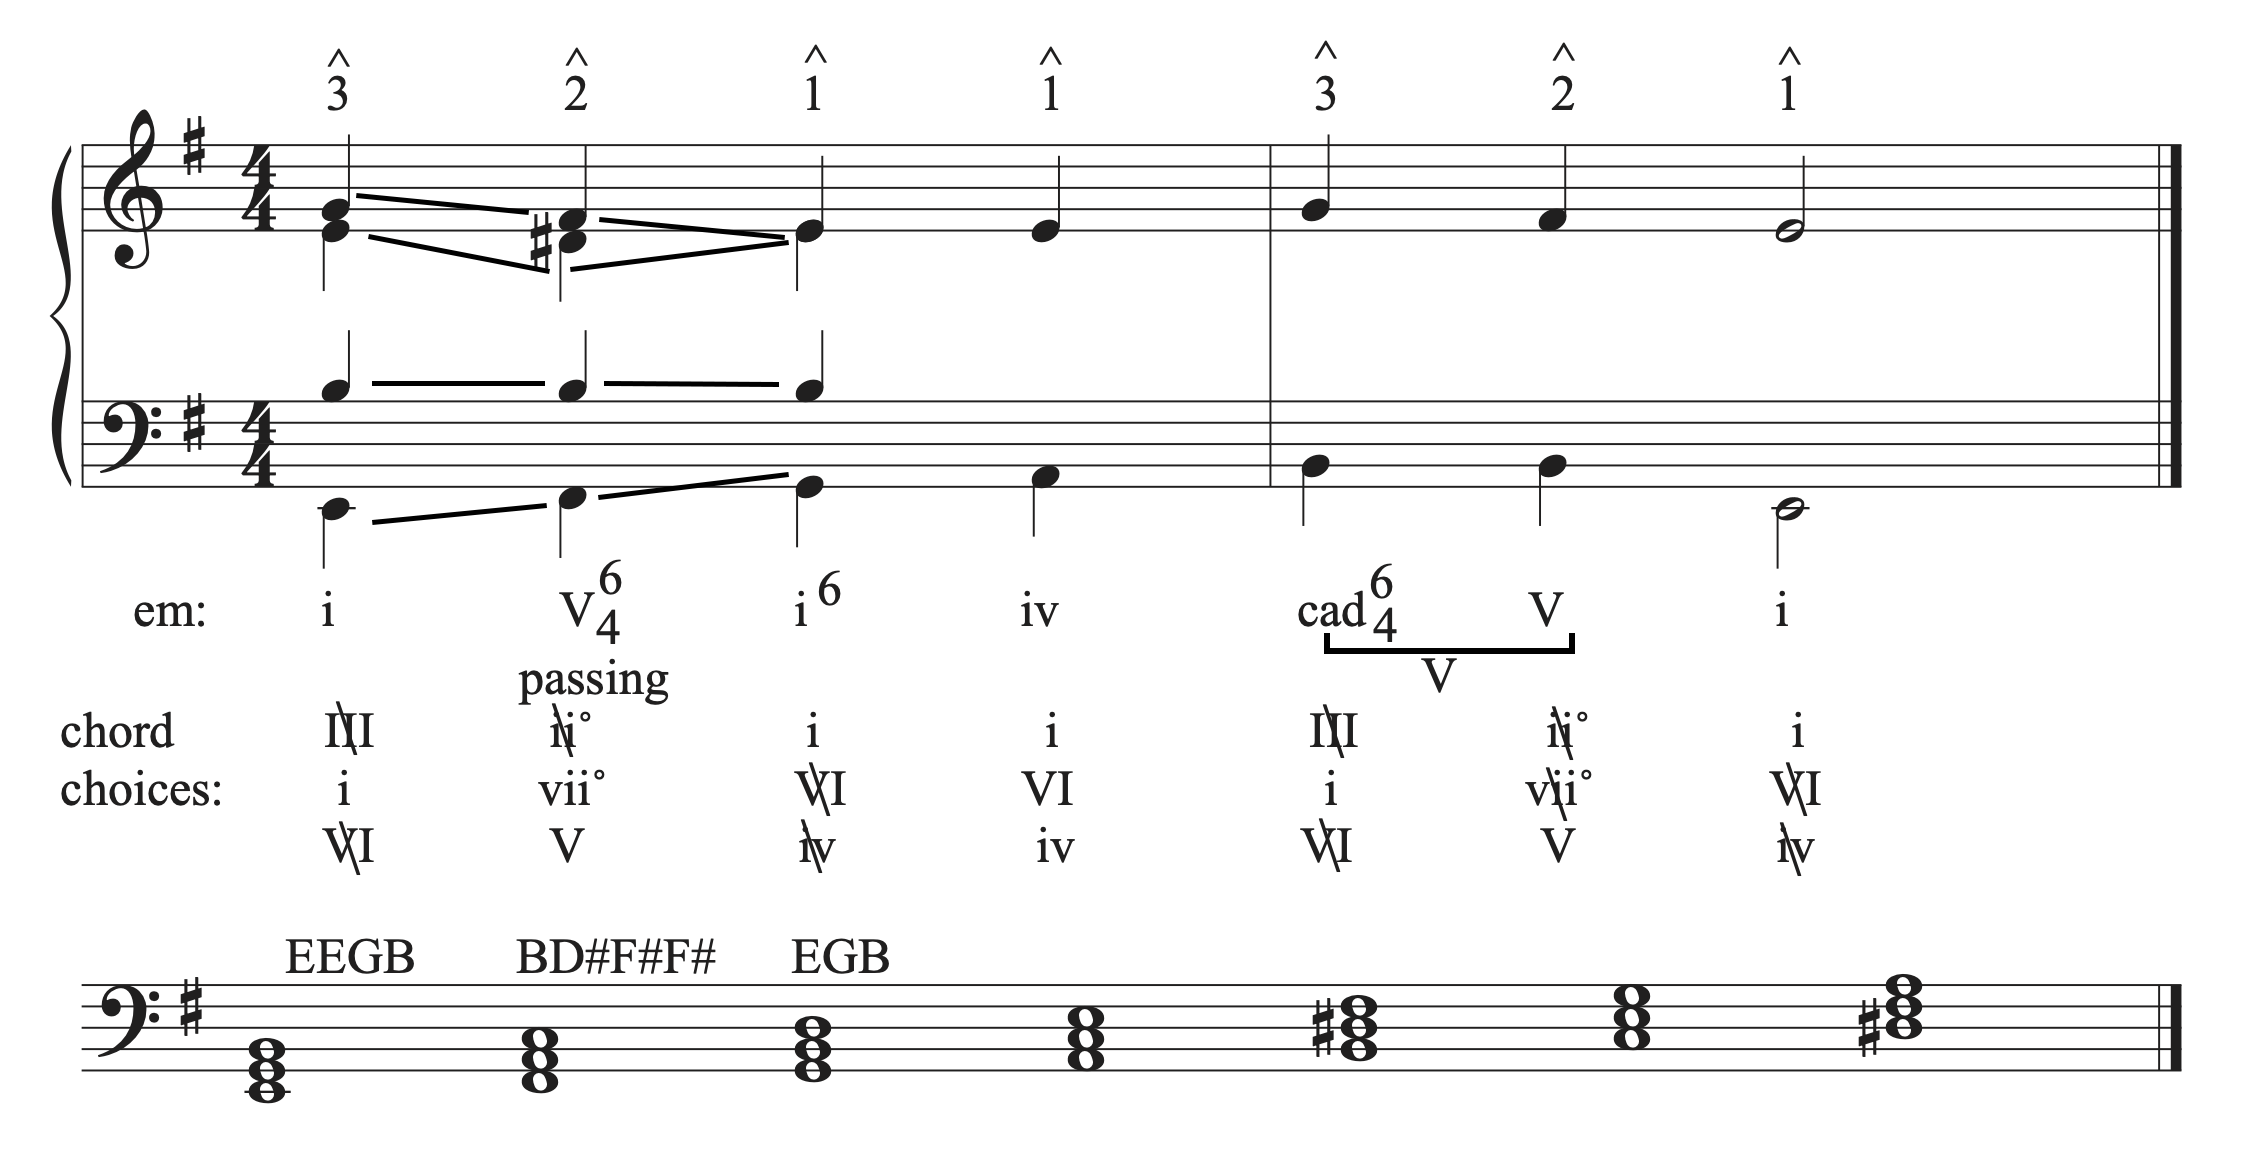 The musical example in G major with a passing six-four chord added.